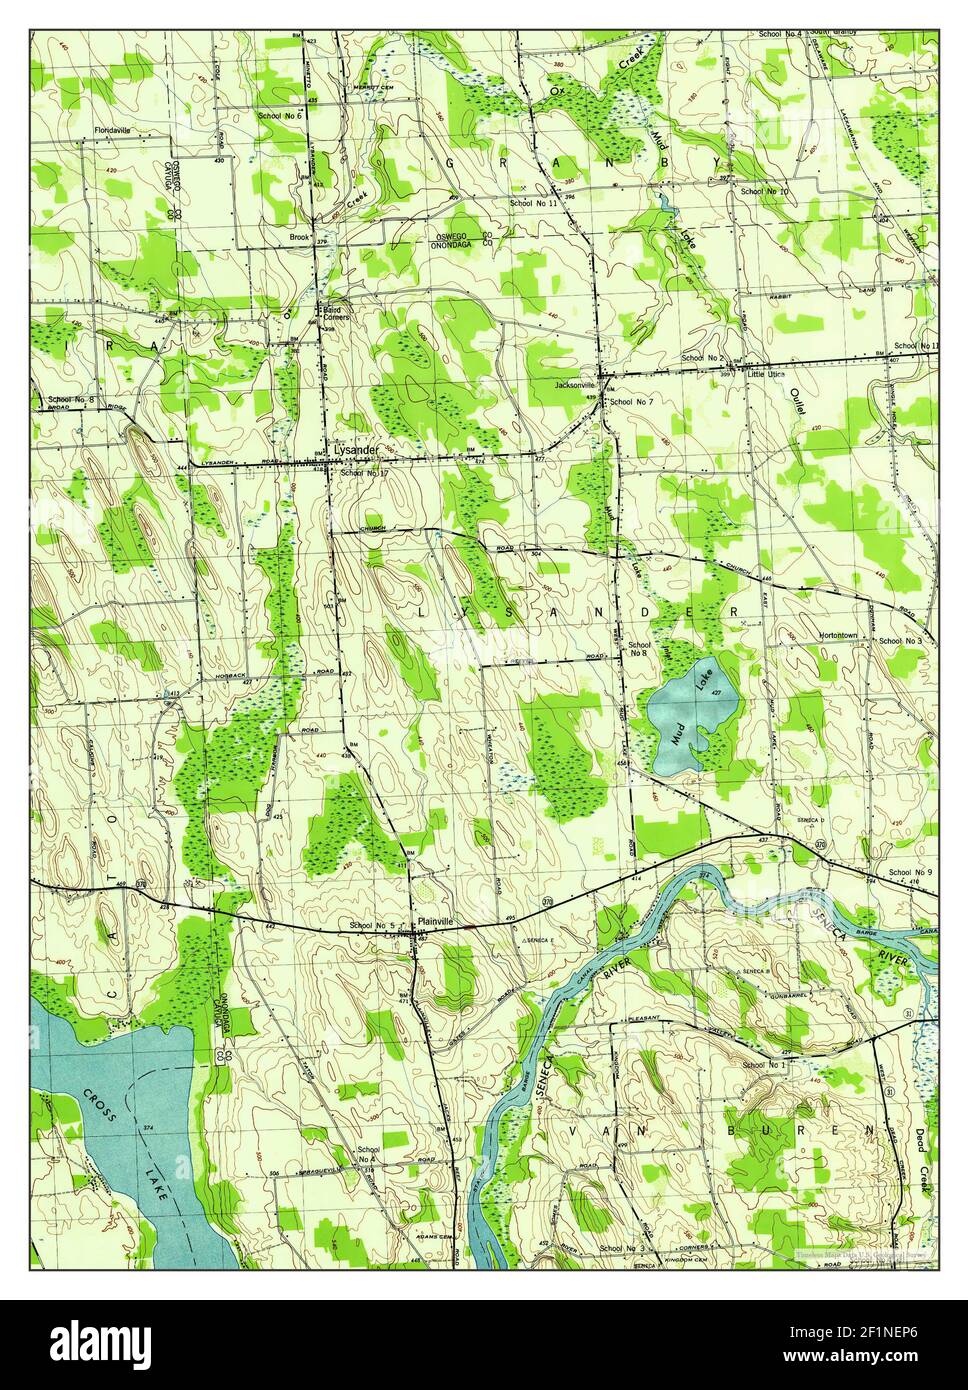 Lysander, New York, map 1943, 1:31680, United States of America by Timeless Maps, data U.S. Geological Survey Stock Photo